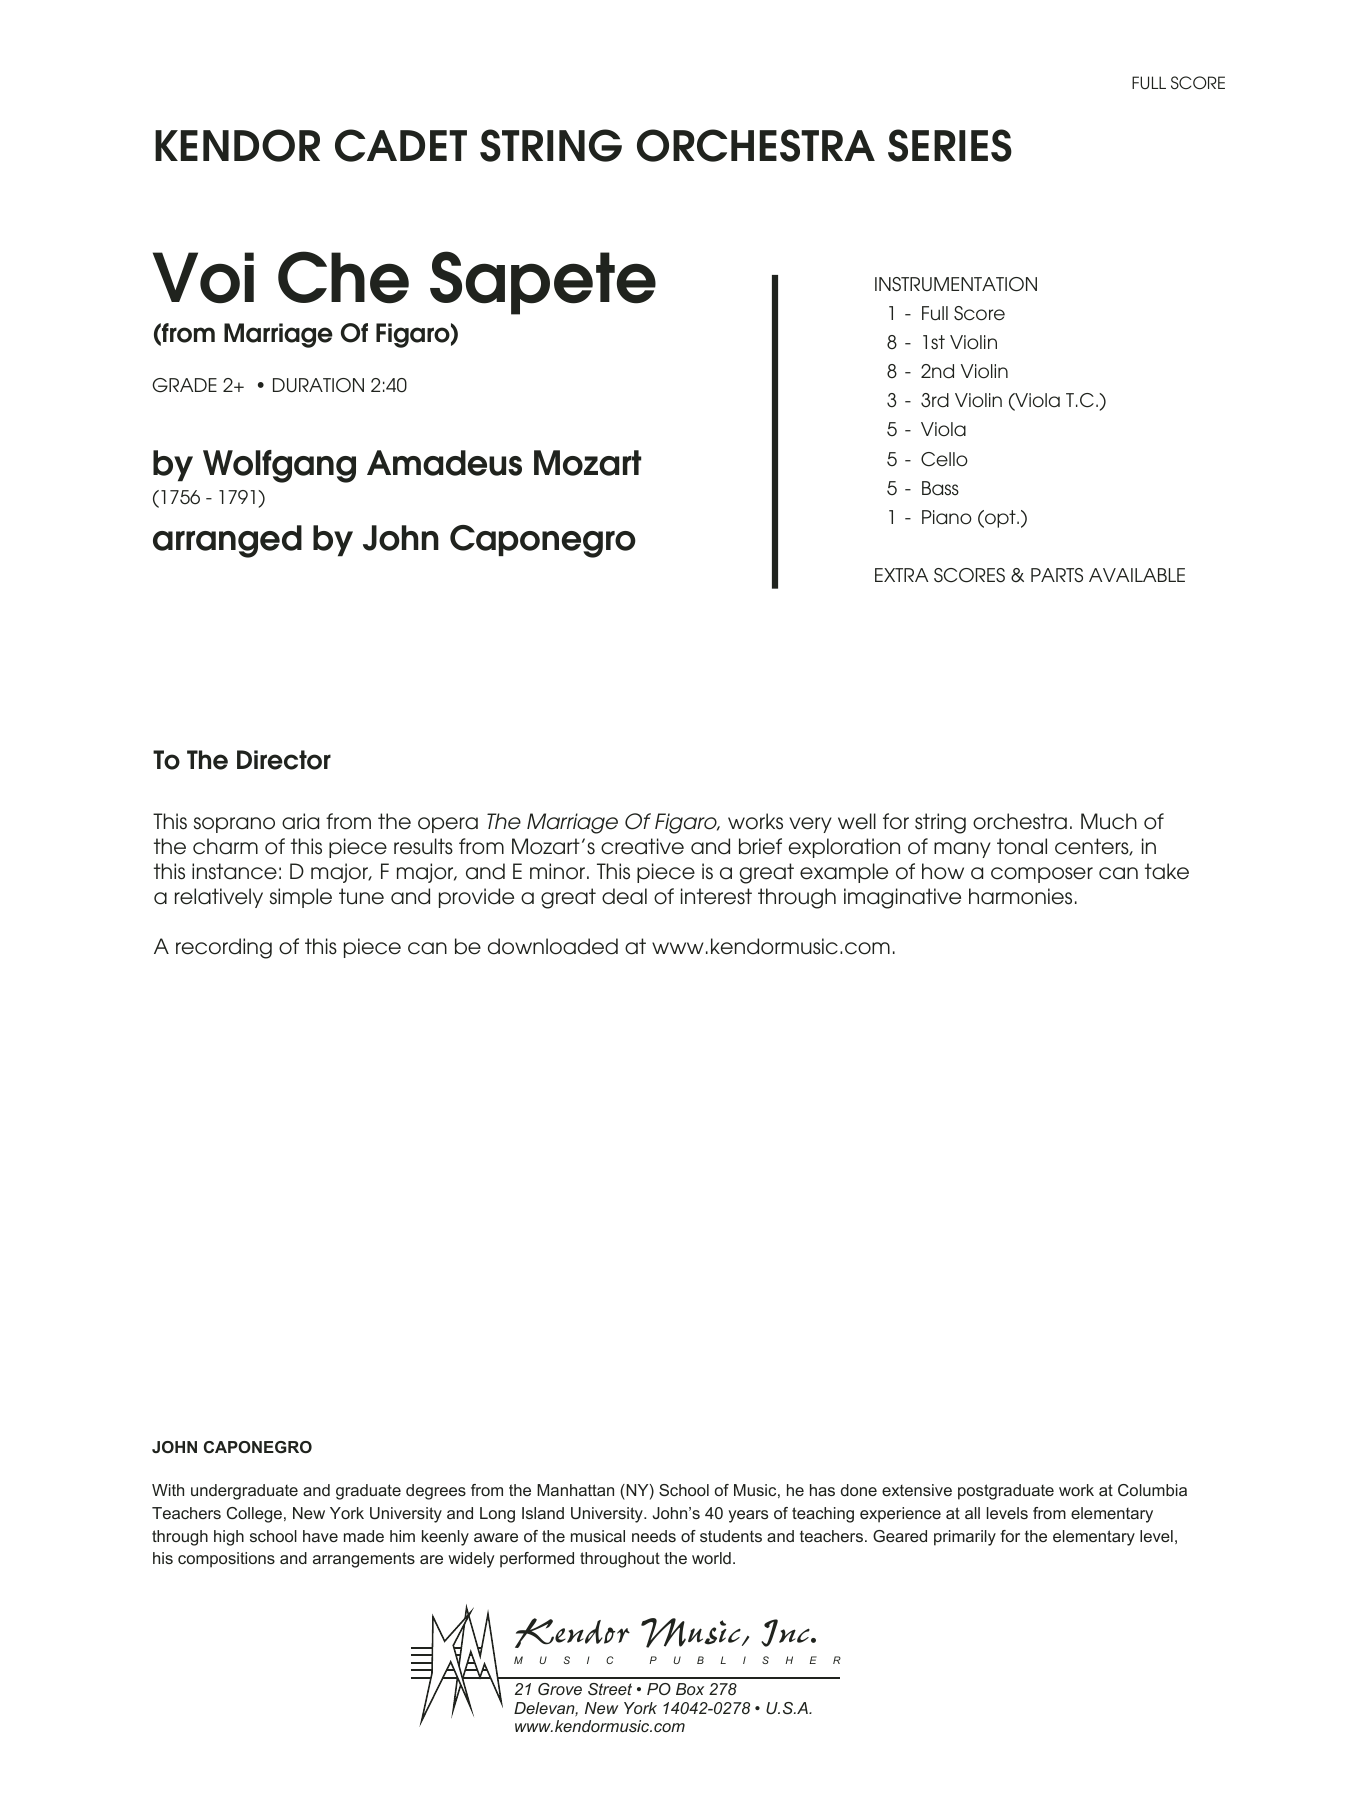 Download John Caponegro Voi Che Sapete (from Marriage Of Figaro Sheet Music